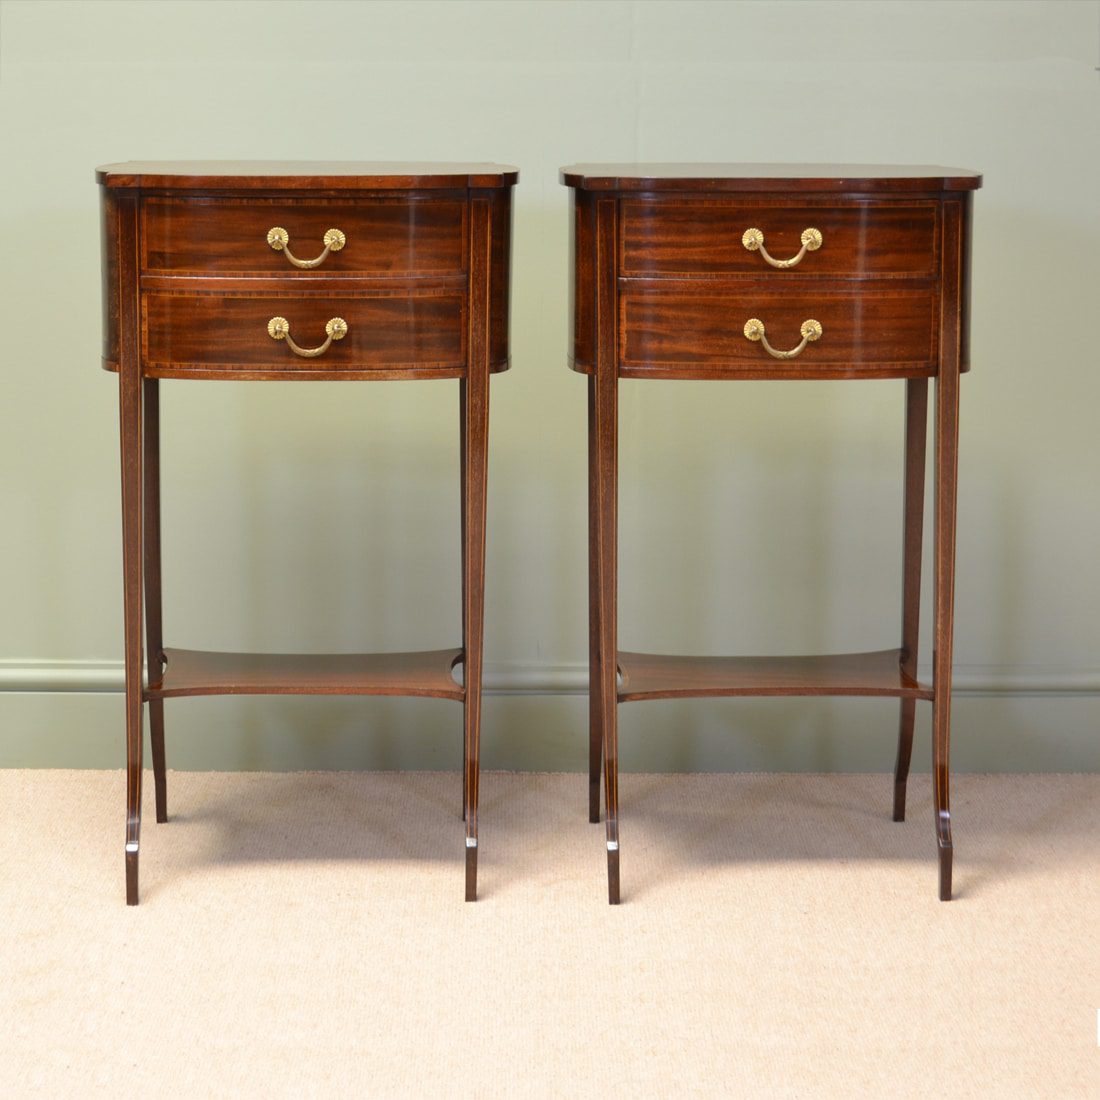 Unusual Pair of Victorian Mahogany Maple And Co Paris Antique Side Tables